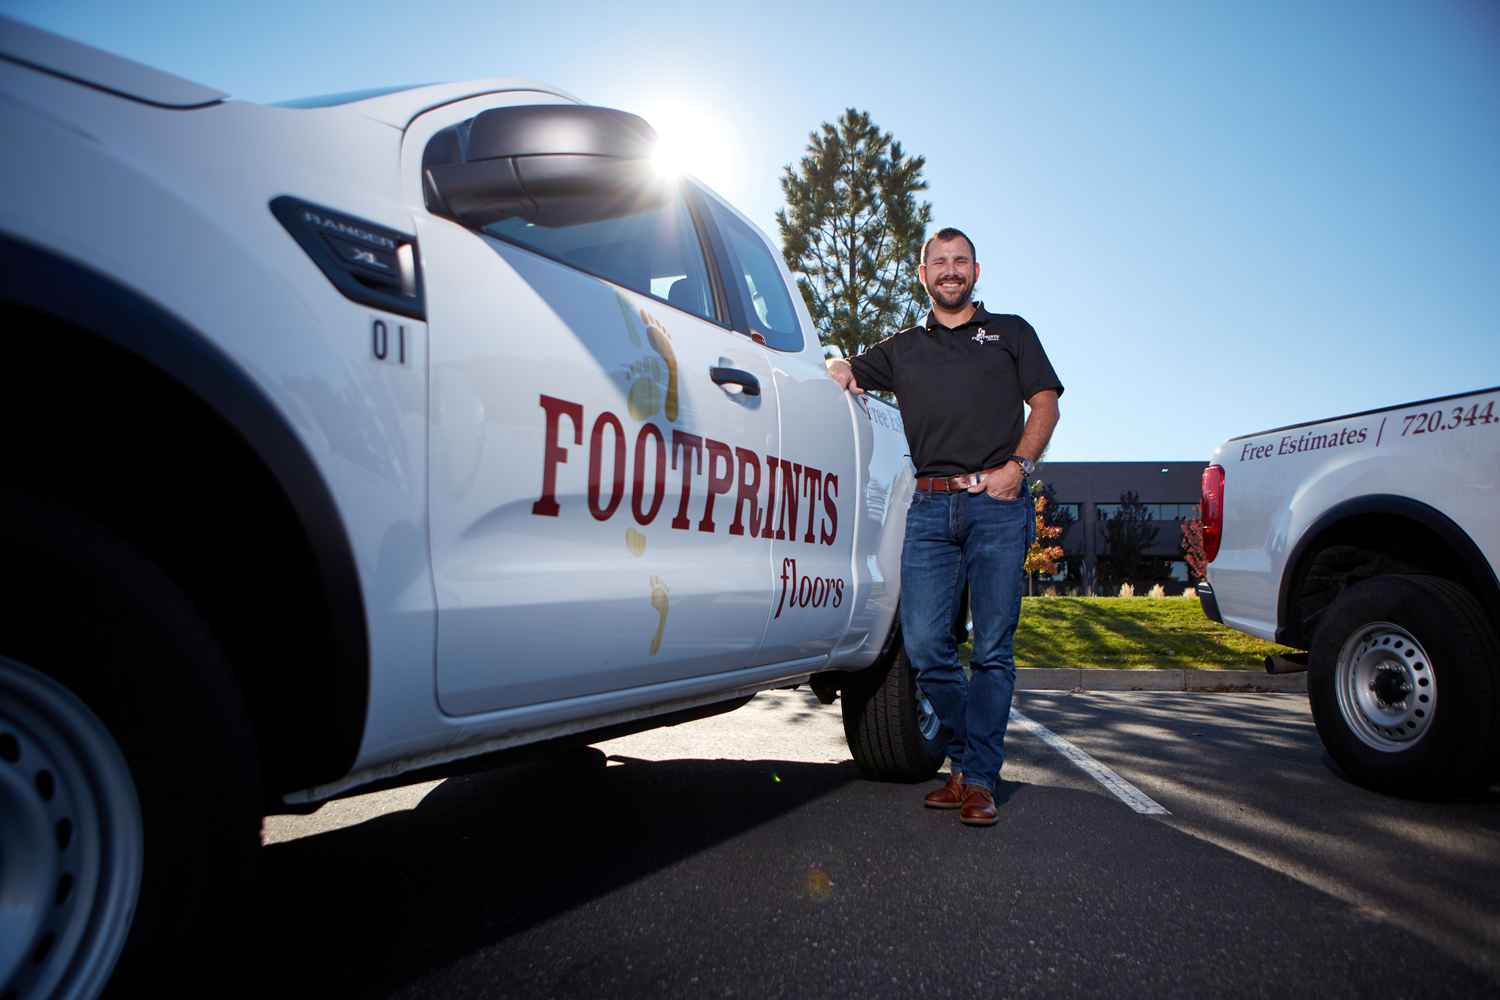 Footprints Floors is ready to help you with any of your flooring needs in Chandler / Gilbert.